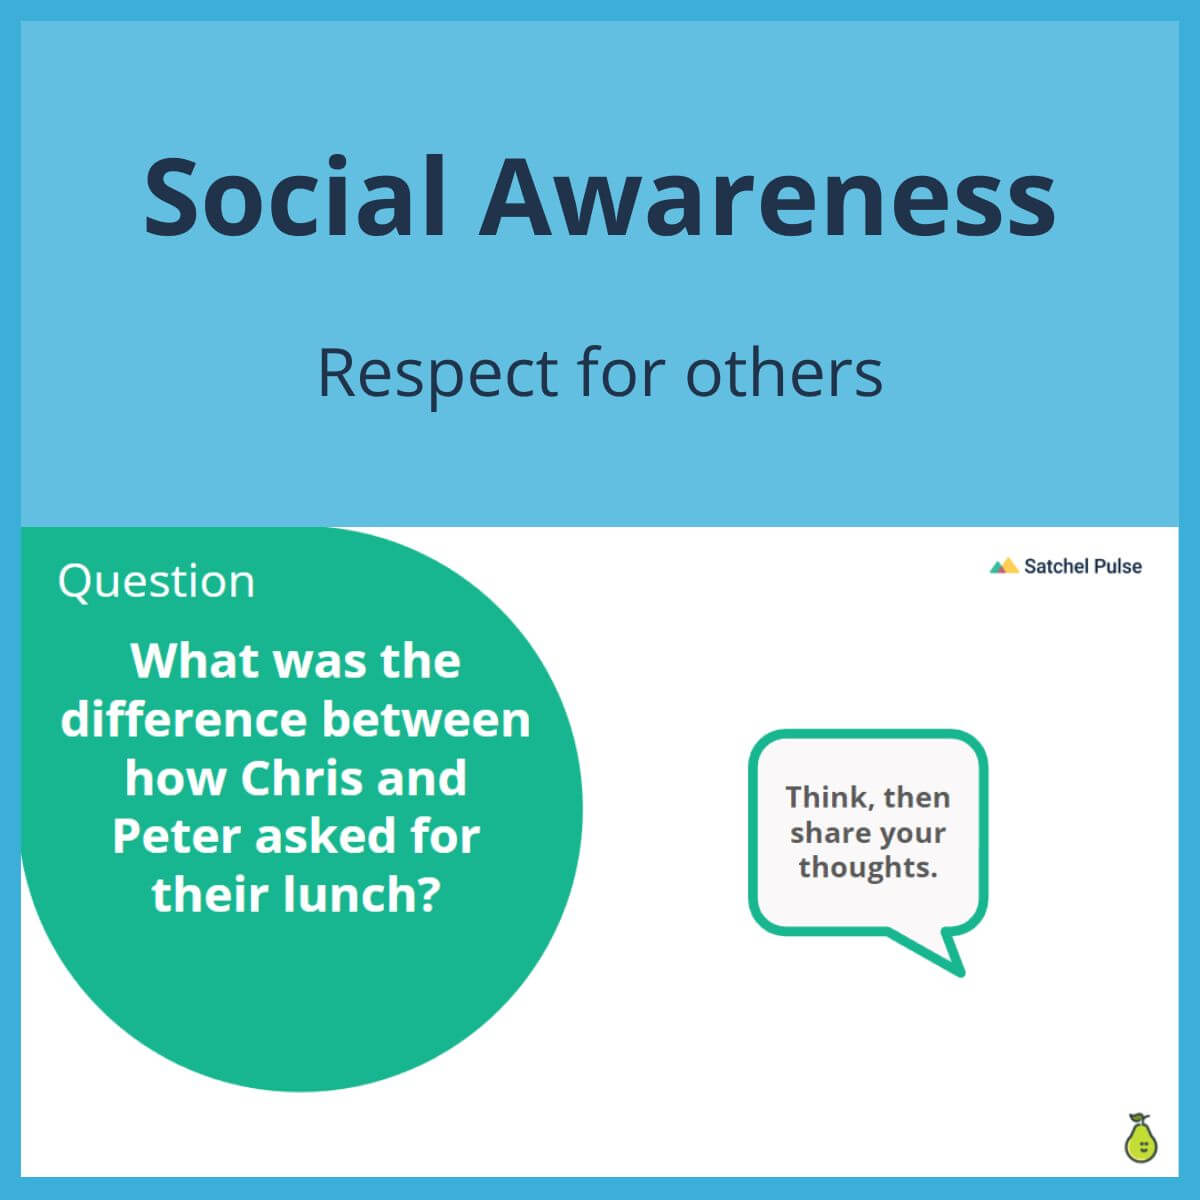 SEL Lesson focusing on Respect for Others to use in your classroom as one of your SEL activities for Social Awareness